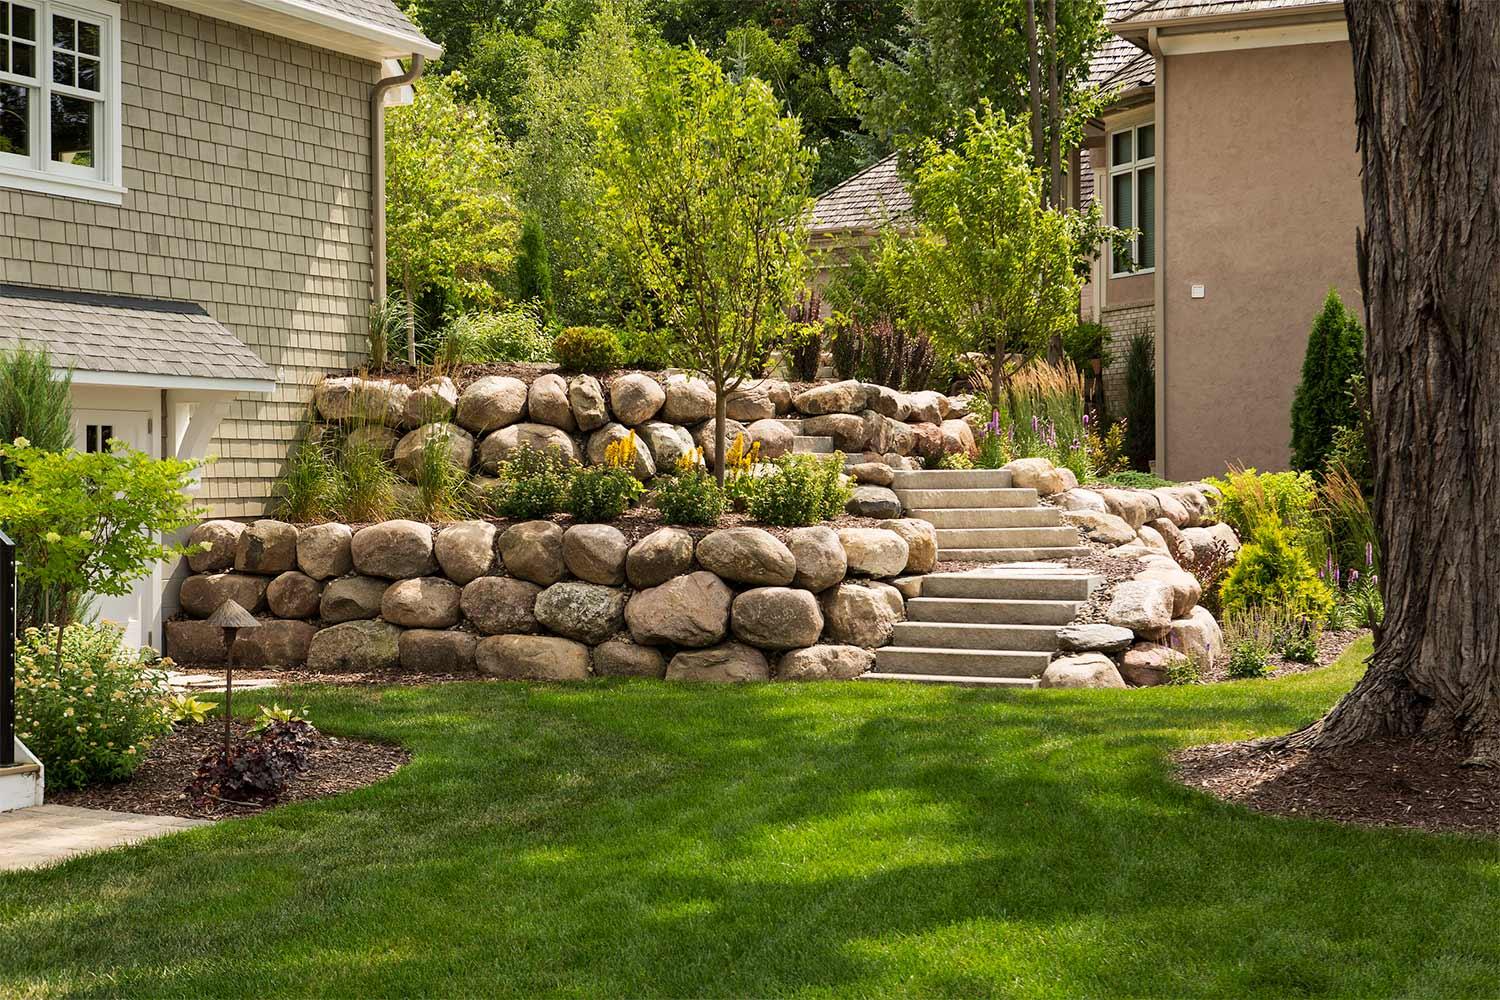 Bright green lawn in the shade. Boulder retaining wall and ornamental trees.